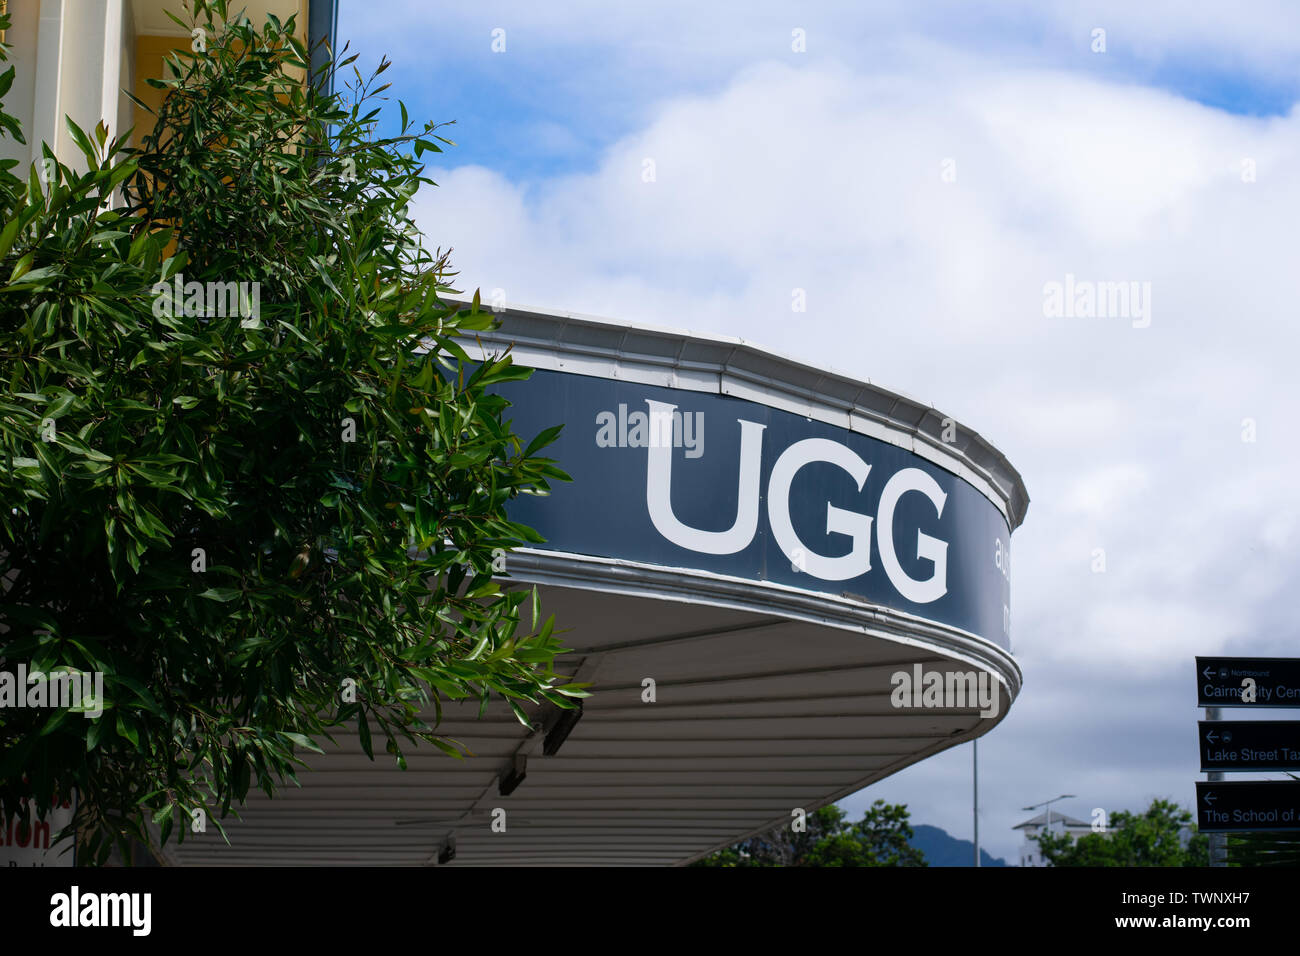 Ugg boots storefront in Cairns 